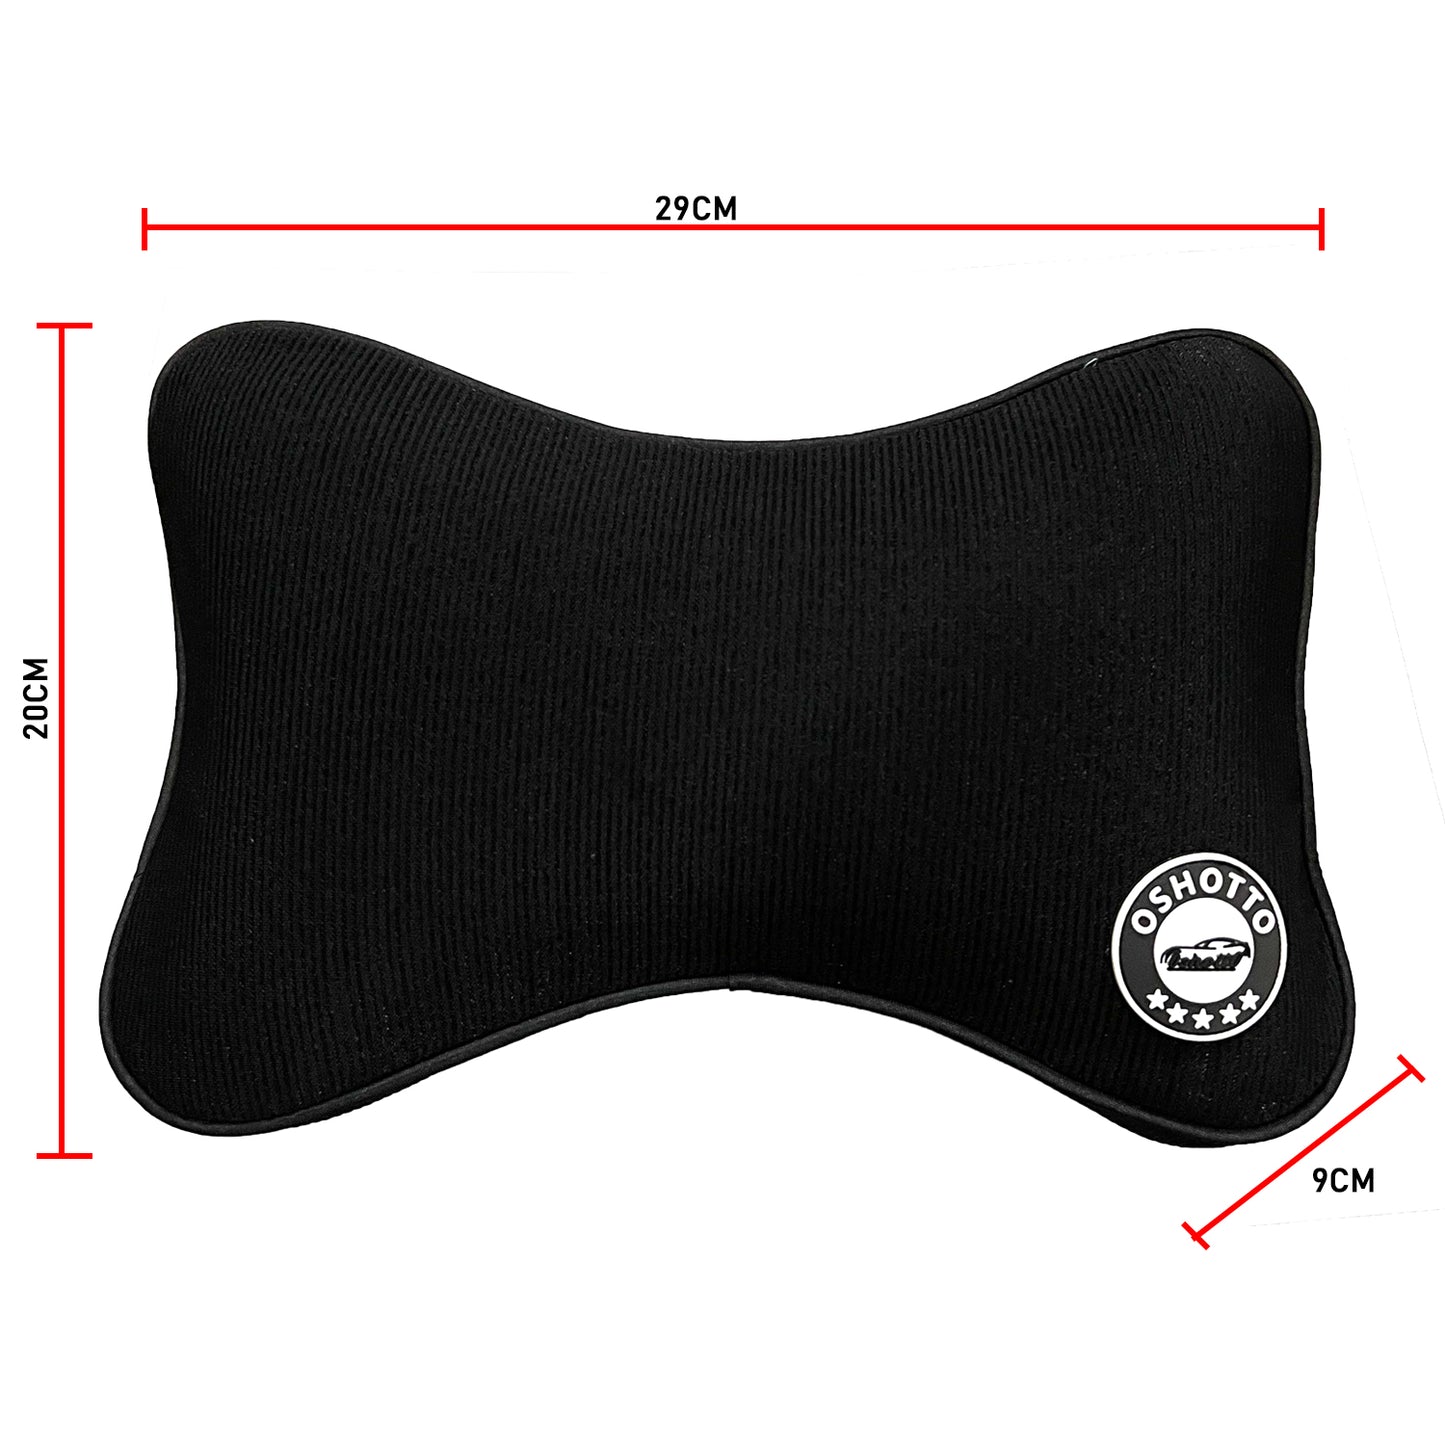 Oshotto Air Fabric Memory Foam (NR-09) Orthopedic Neckrest for All Cars (Black)